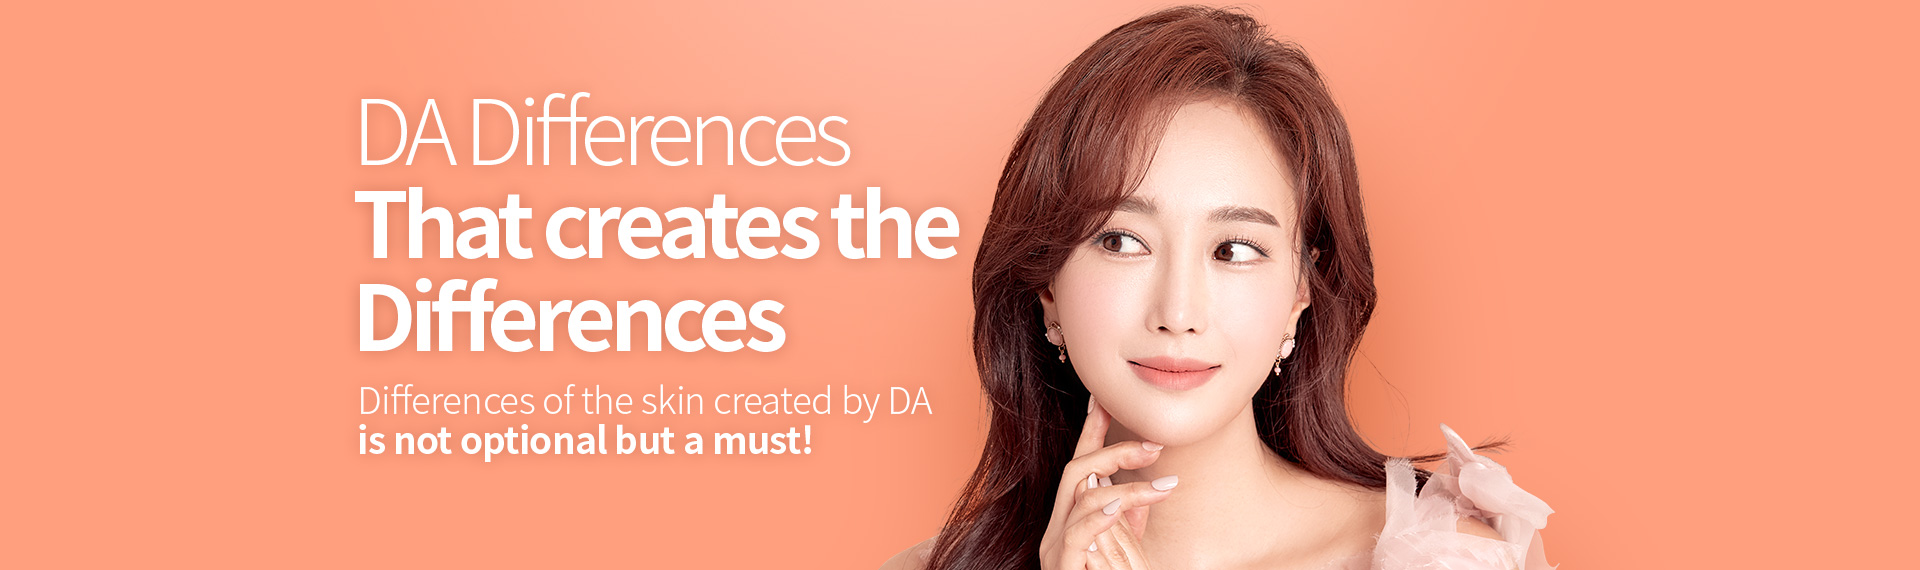 Differences of the skin created by DA is not optional but a must!